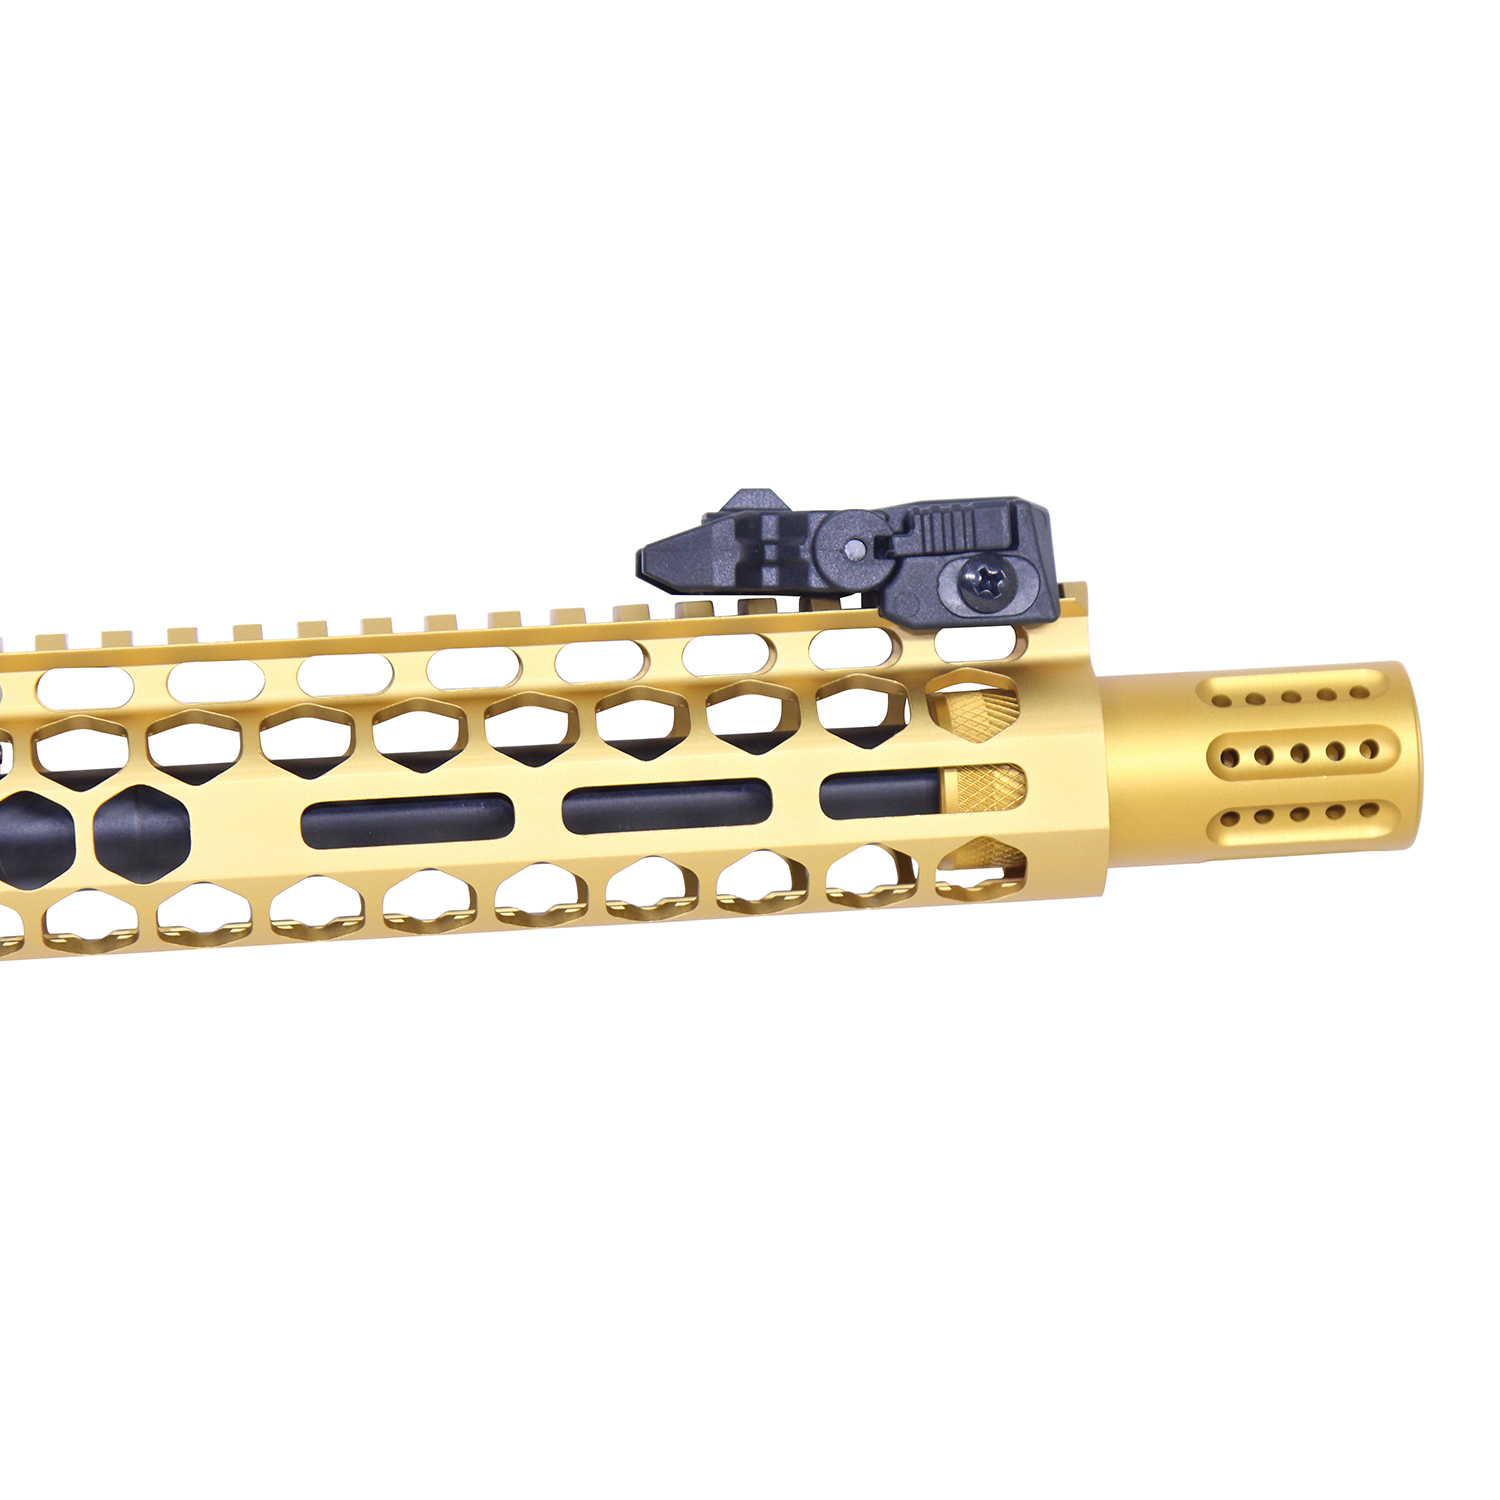 Check out our AR-15 Micro Slip Over Barrel Shroud With Multi Port Muzzle Br...